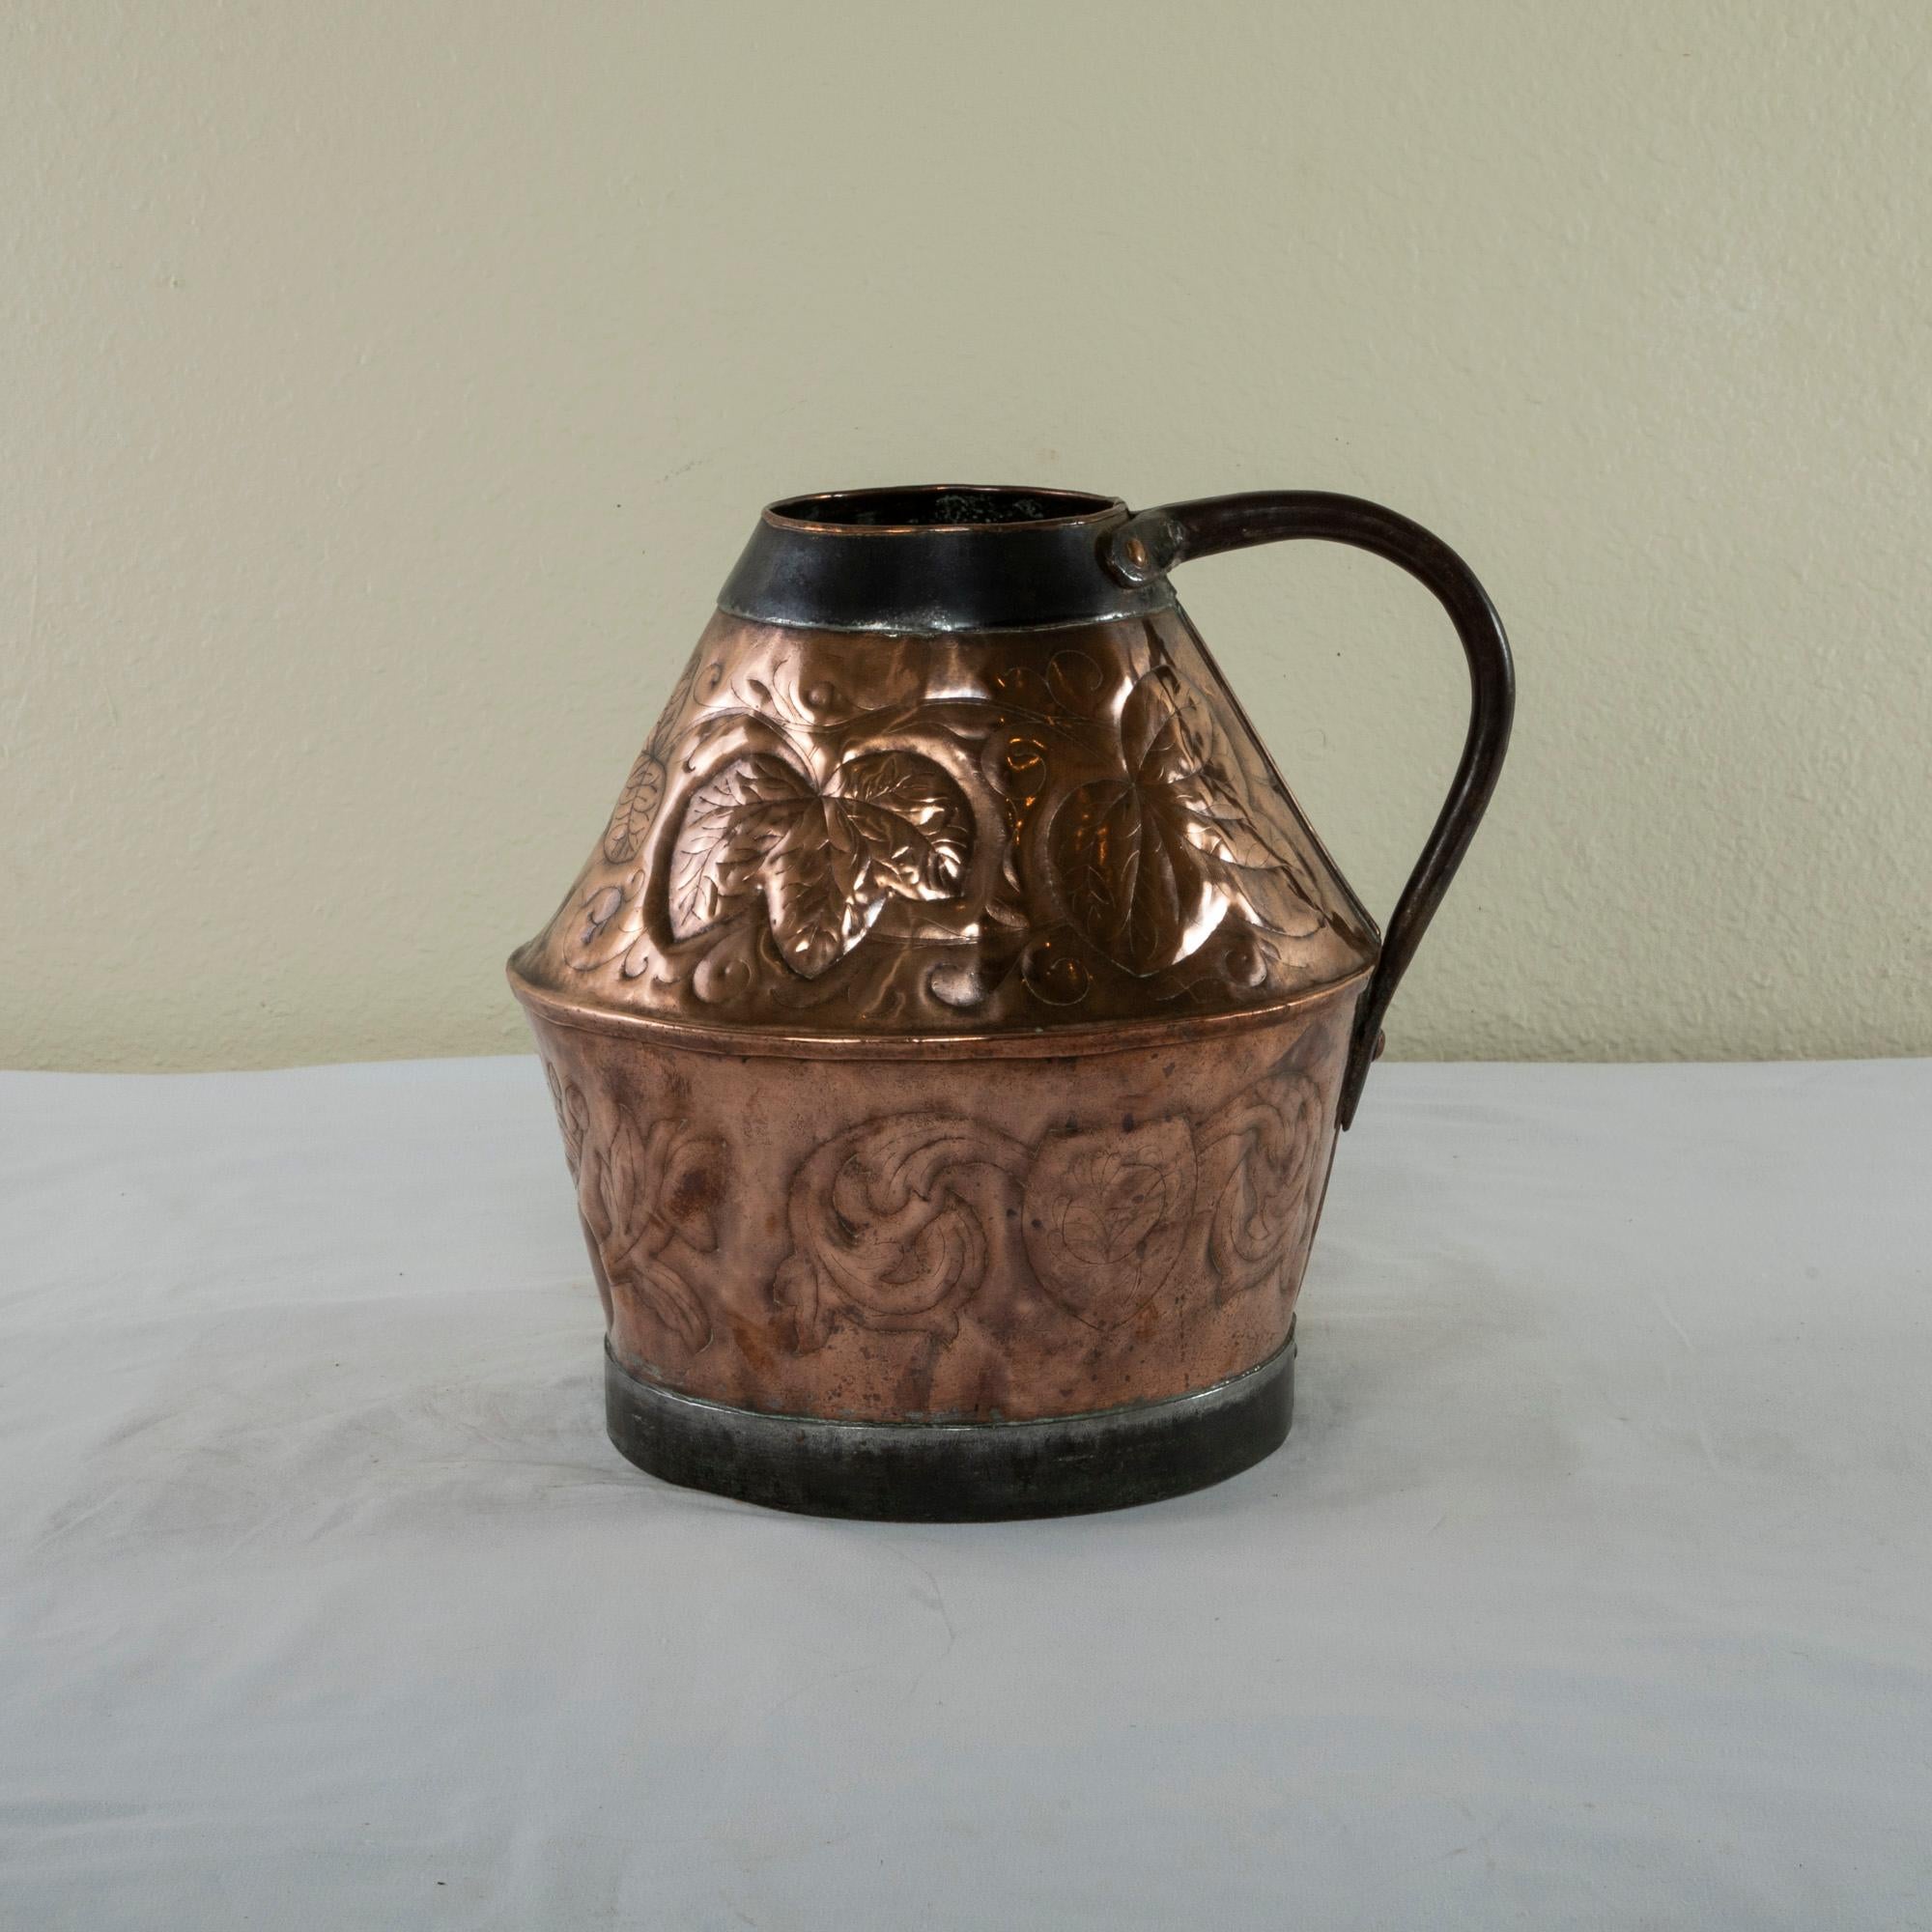 Repoussé Late 19th Century French Copper Repousse Pitcher with Iron Straps and Handle For Sale